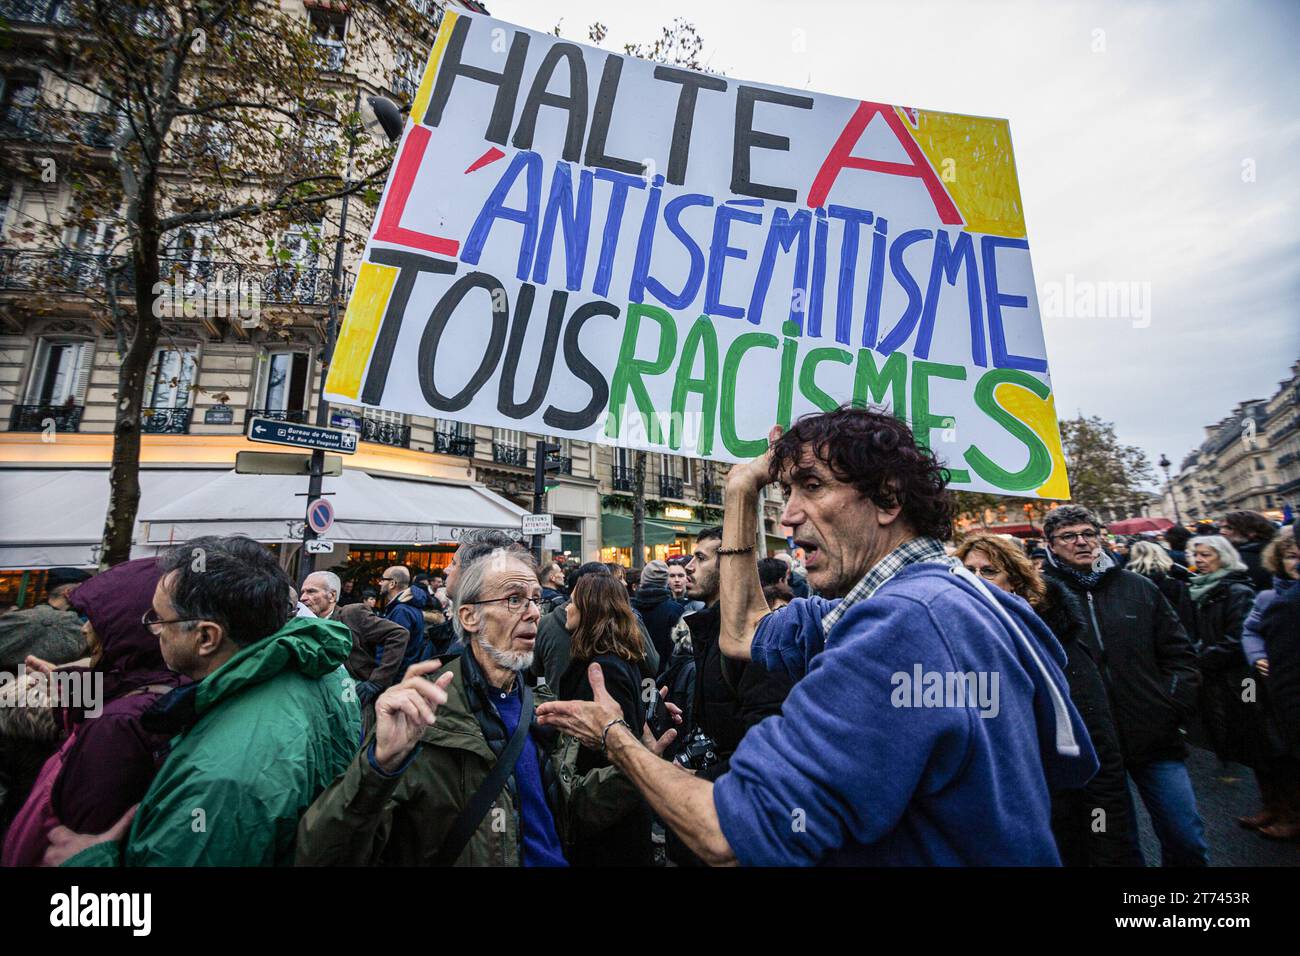 A protester holds a placard that says 'Stop the antisemitism and all the racism' at the end of the demonstration against antisemitism. Demonstrations against antisemitism took place all over France. In Paris, close to 105 thousand people were present at the civic march against anti-Semitism organized by the president of the National Assembly, Yaël Braun-Pivet, and the president of the Senate, Gérard Larcher, together with political parties, with the exception of the La France Soumise party, who refused to participate in the march together with Marine Le Pen's far-right Rassemblement National p Stock Photo